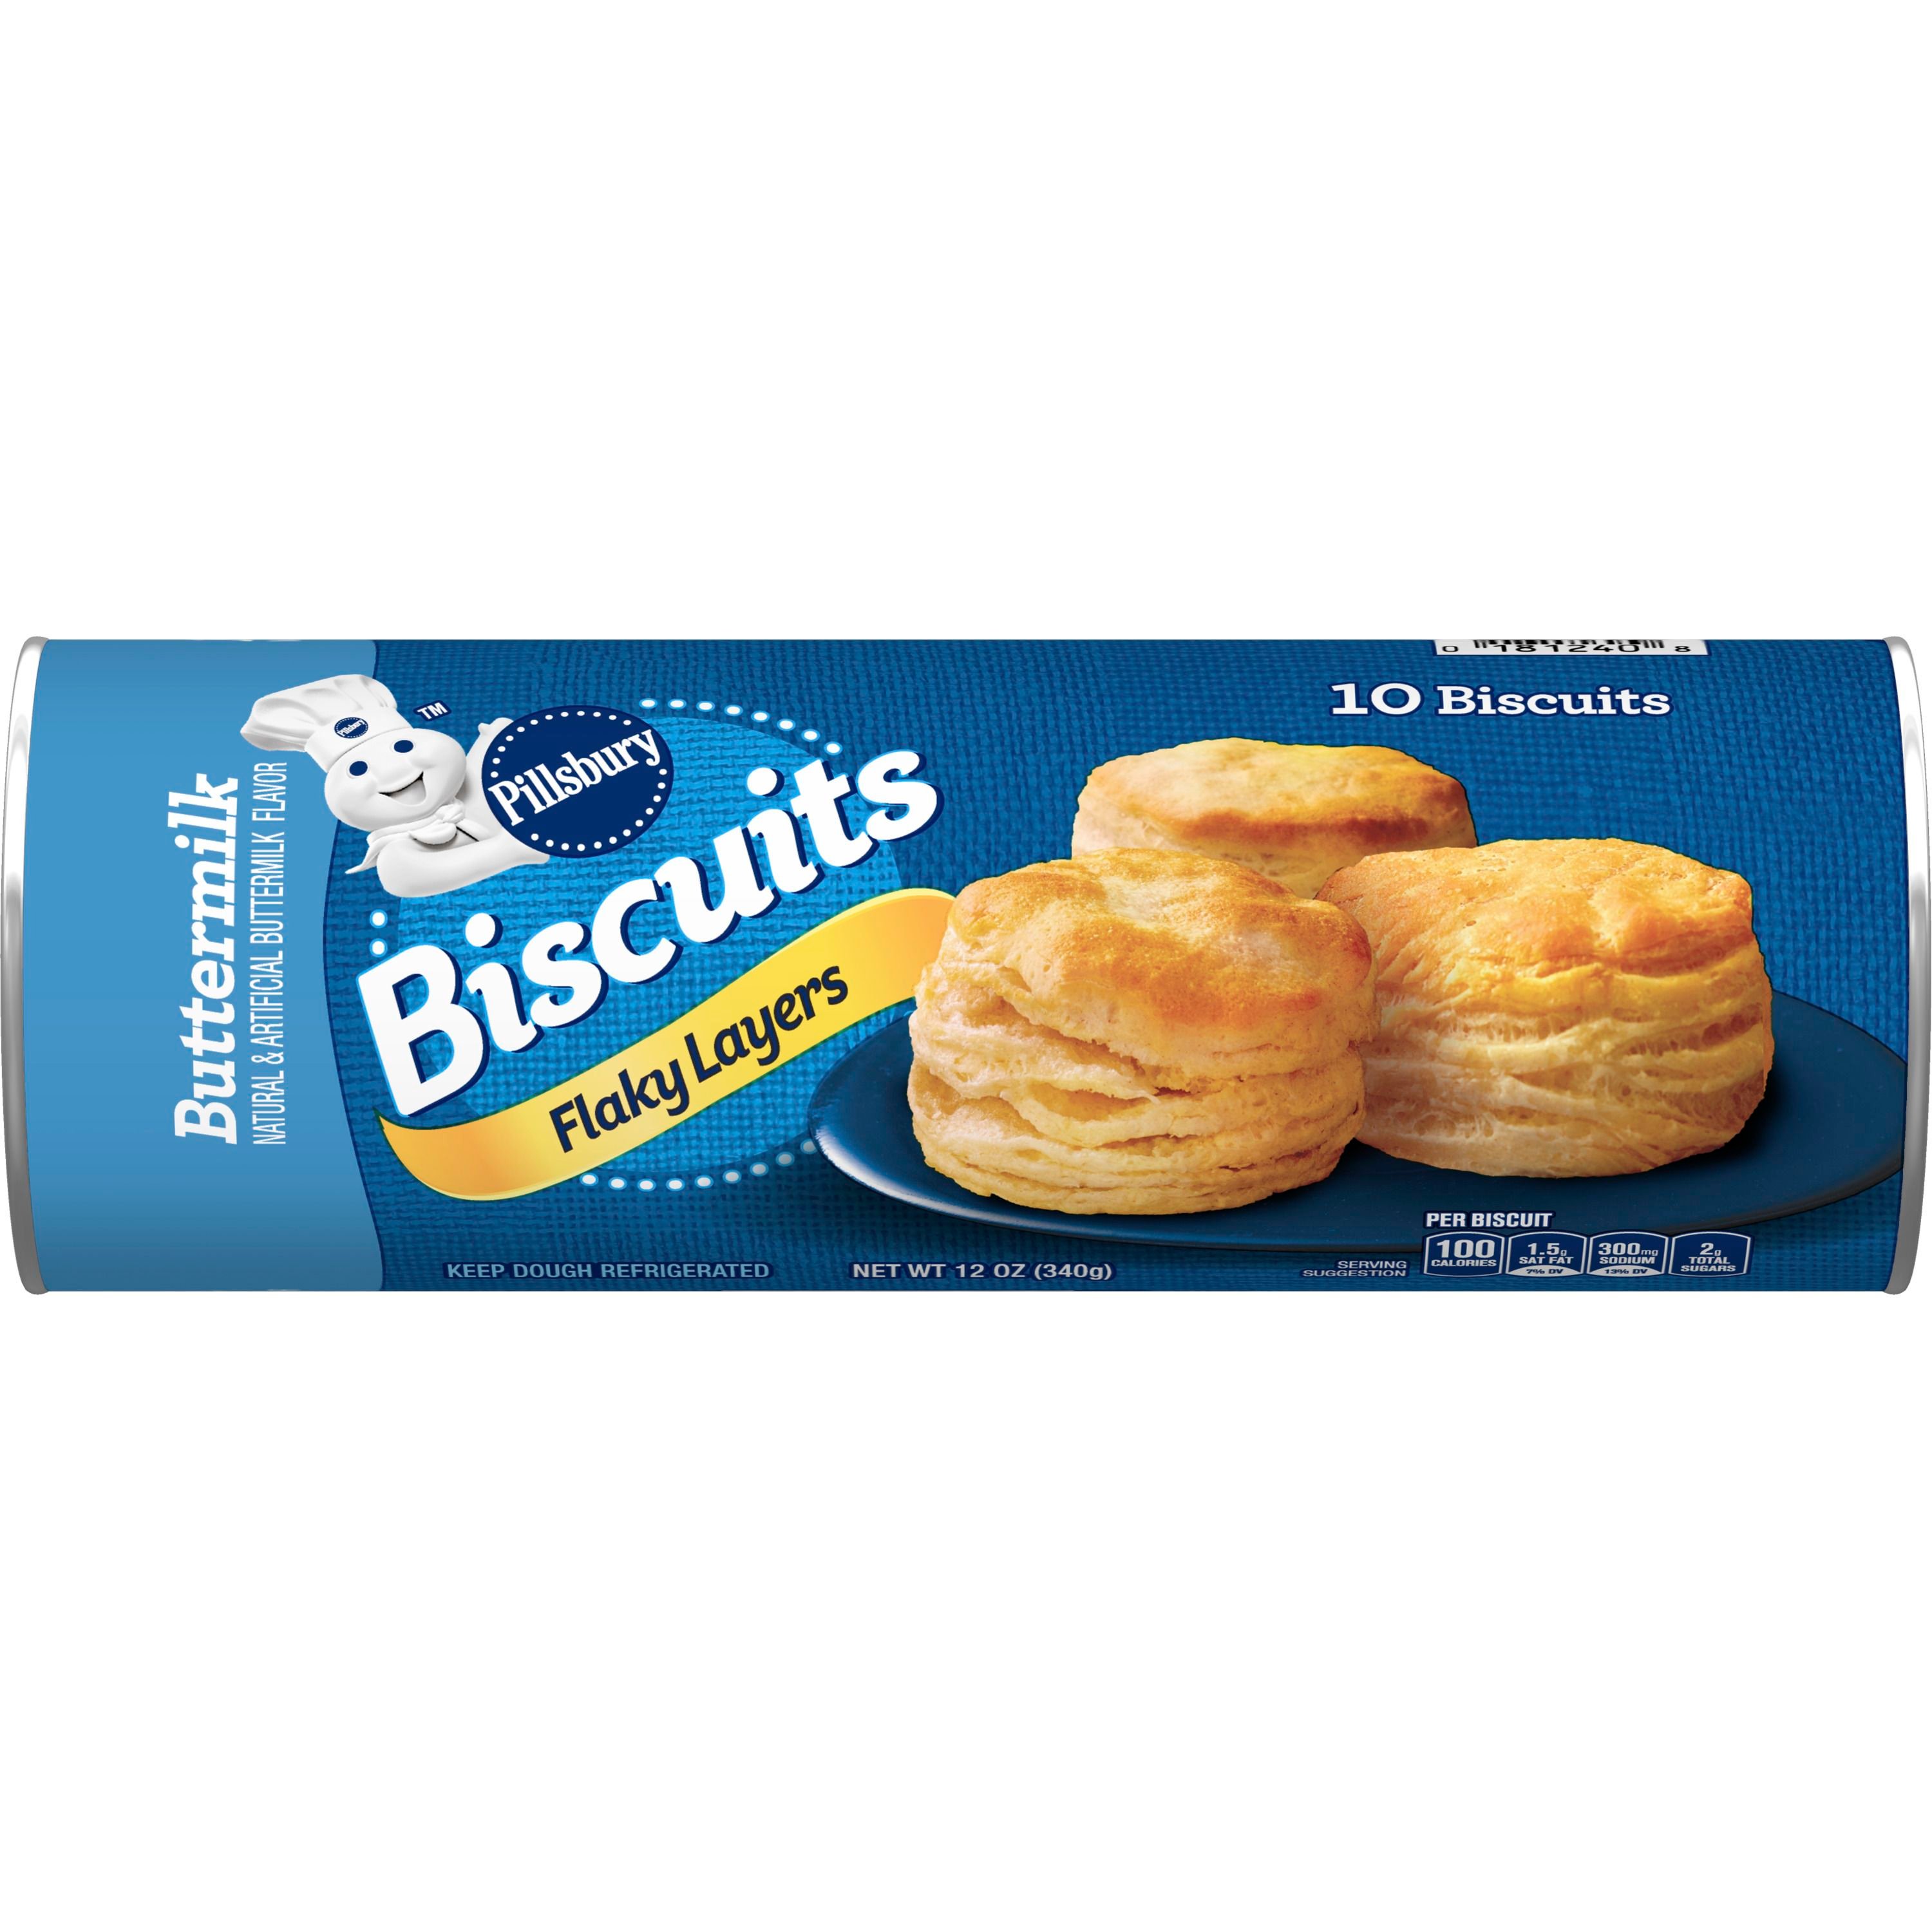 Pillsbury™ Flaky Layers Buttermilk Biscuits 10 ct - Front